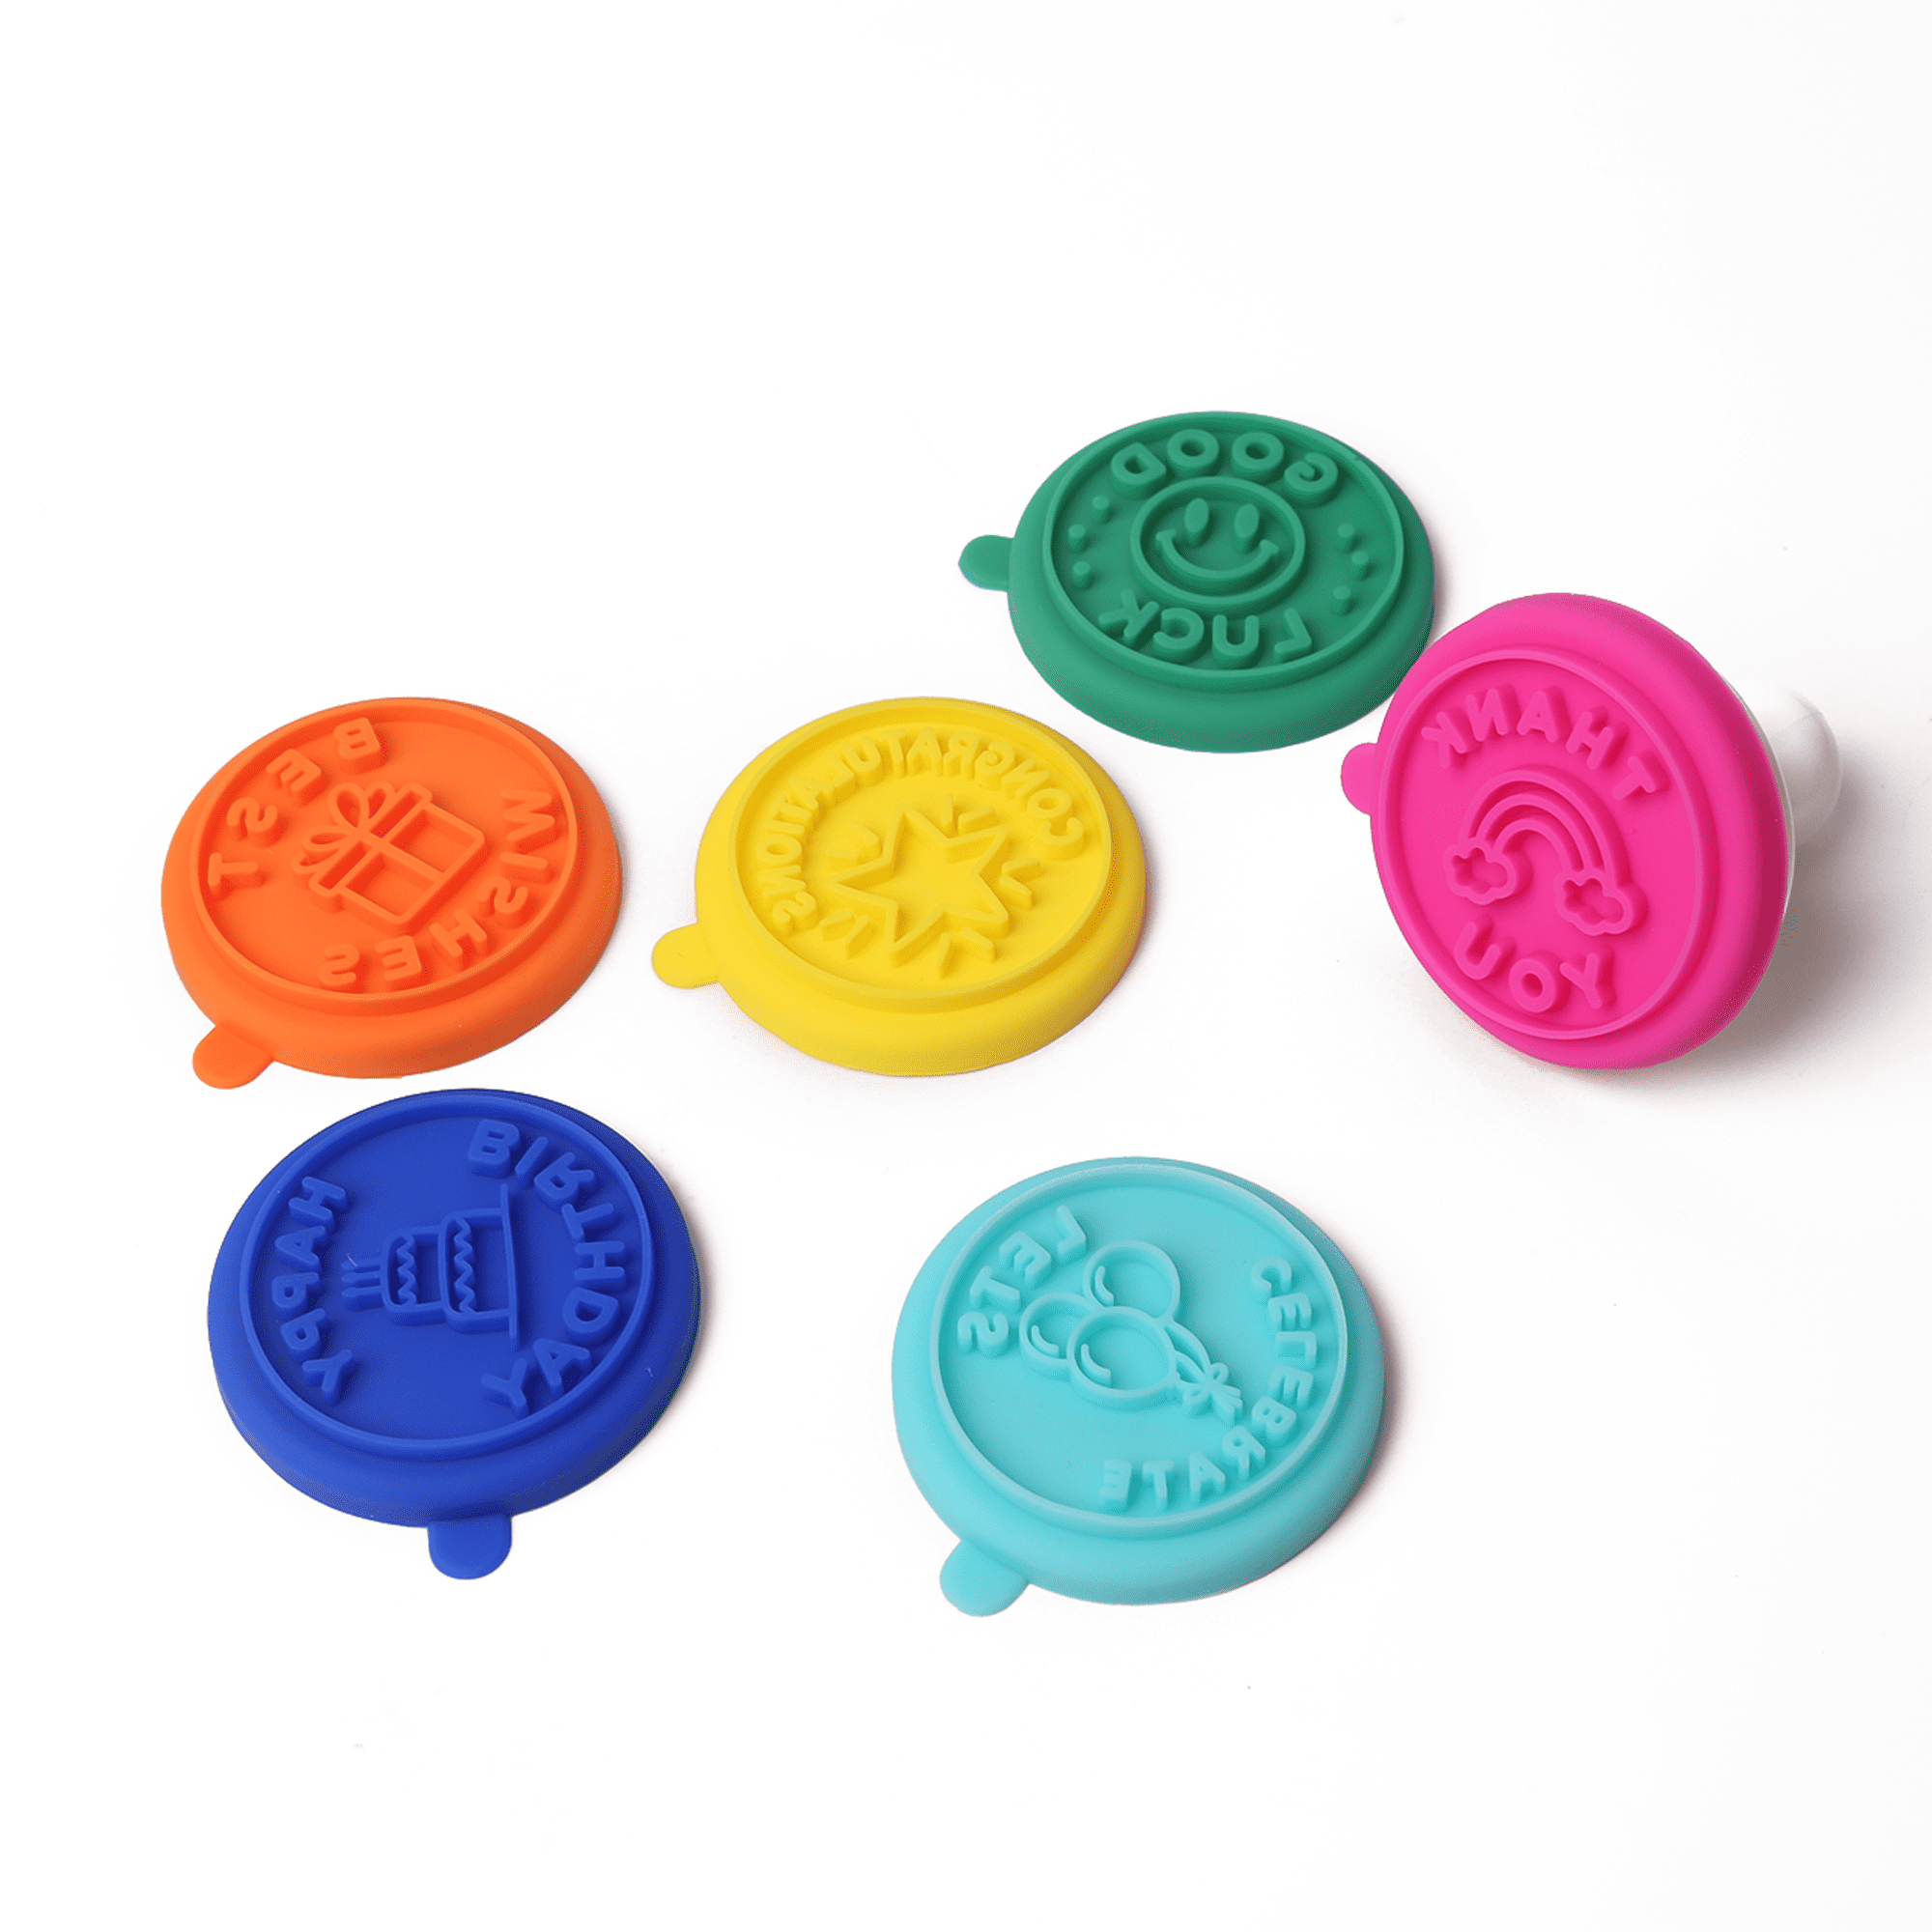 Disney© 100th Anniversary Silicone Cookie Stamps, Set of 4